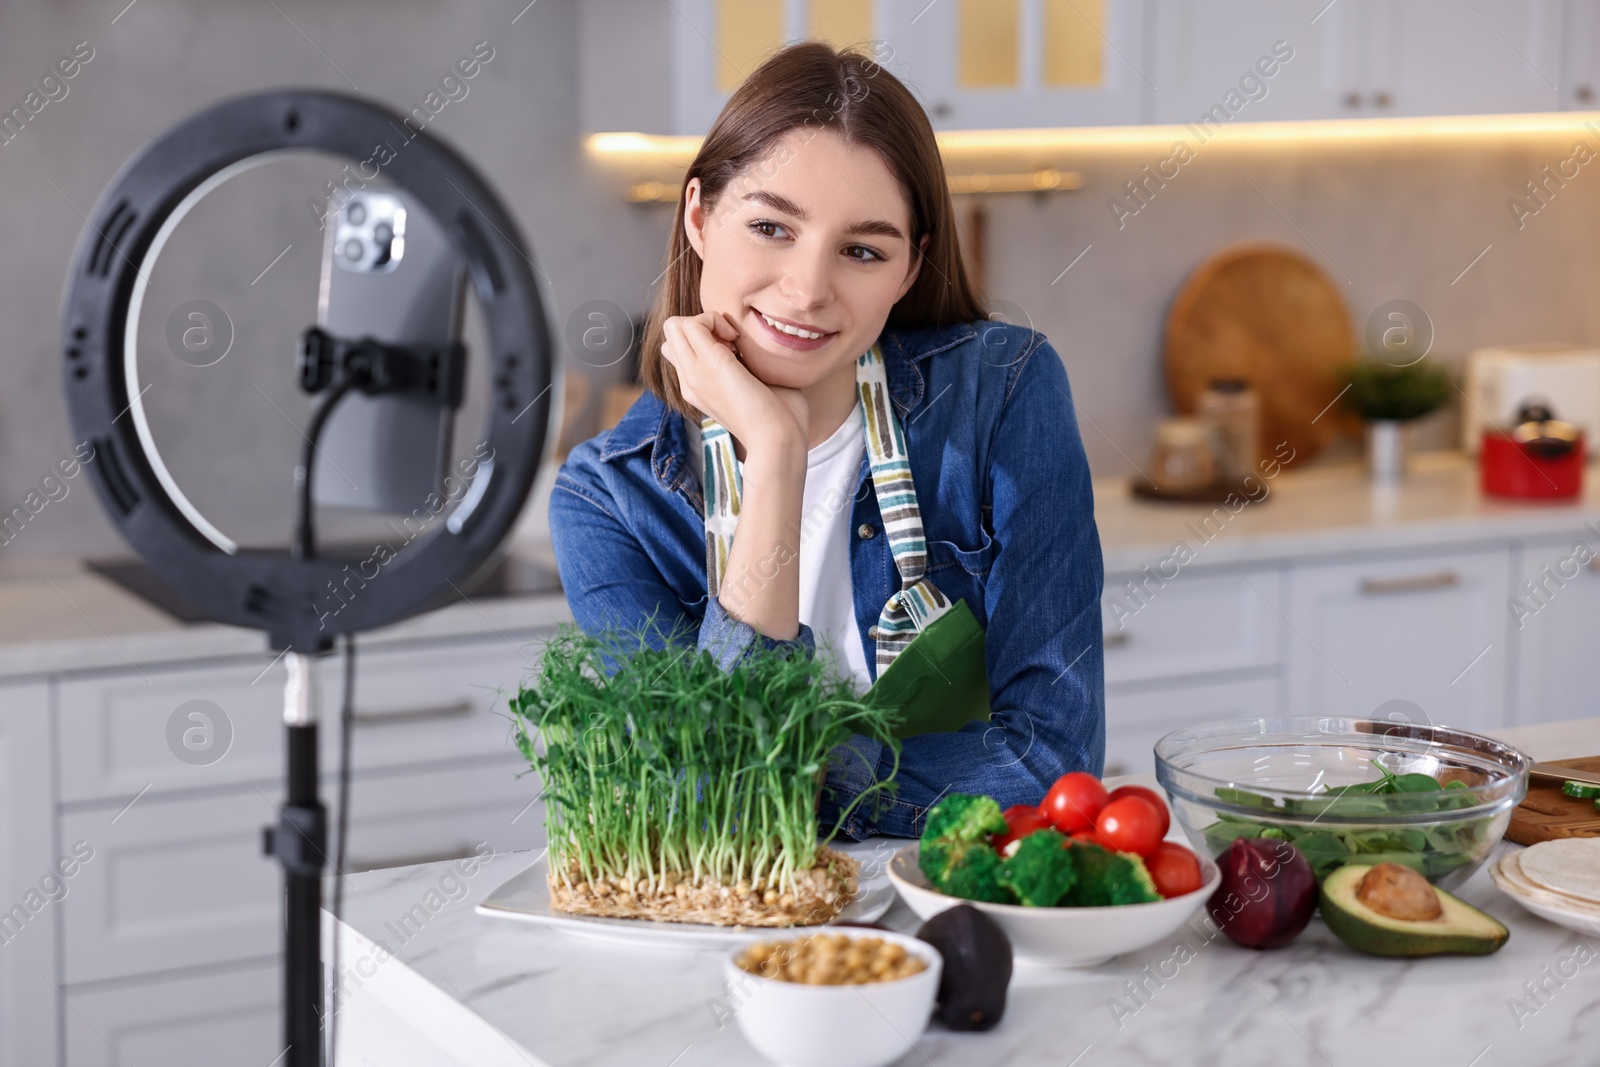 Photo of Food blogger cooking while recording video with smartphone and ring lamp in kitchen